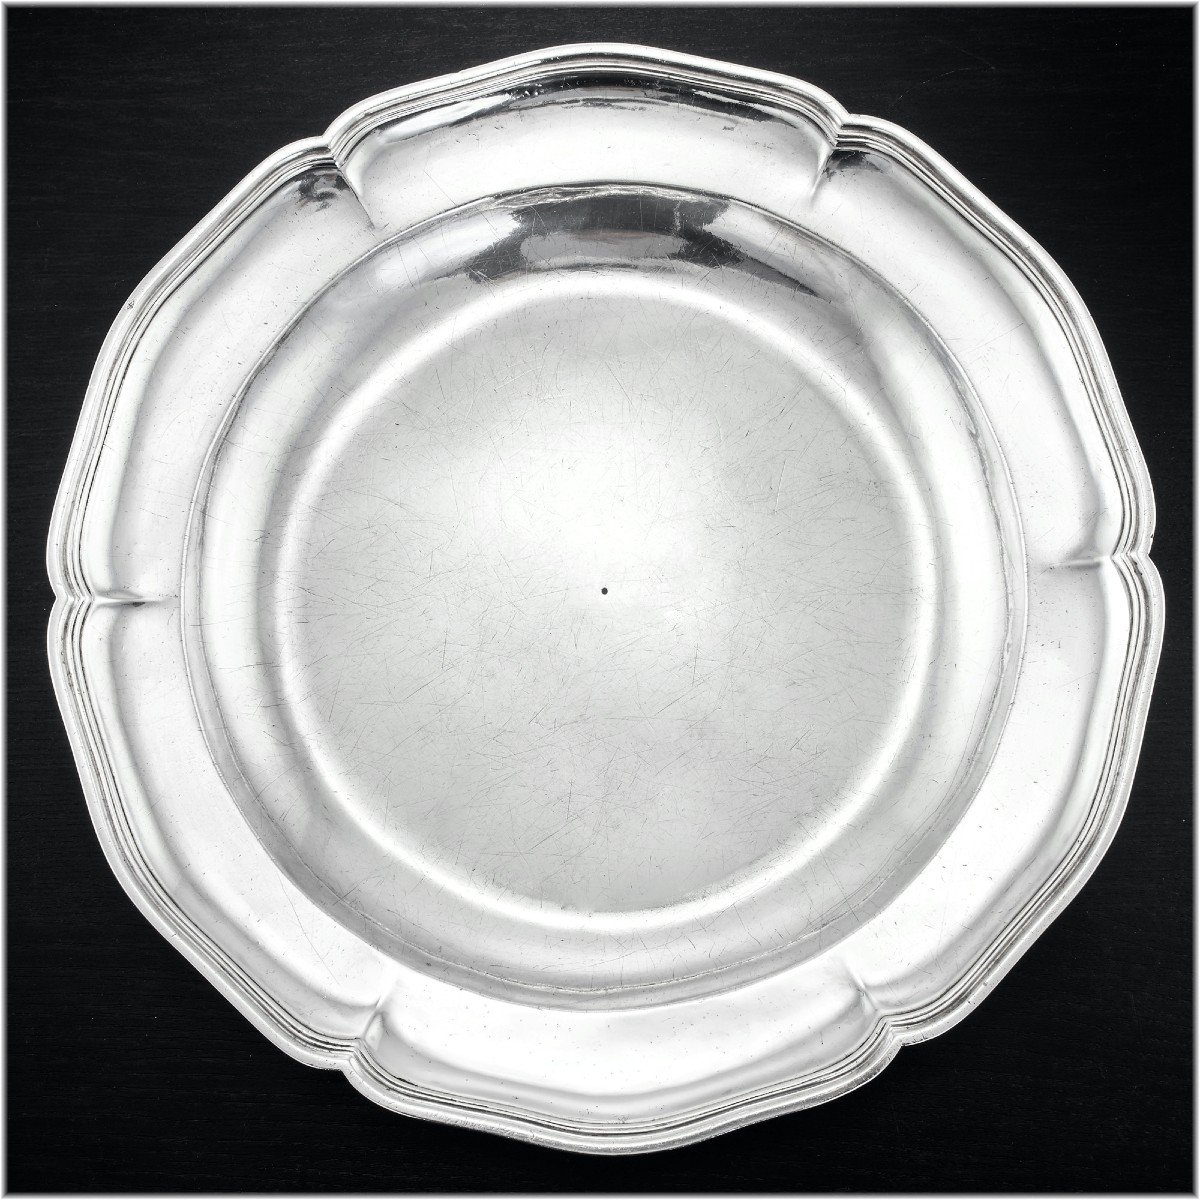 Bazille : Rare 18th Century Large Round Dish / Platter In Sterling Silver - Montpellier 1773